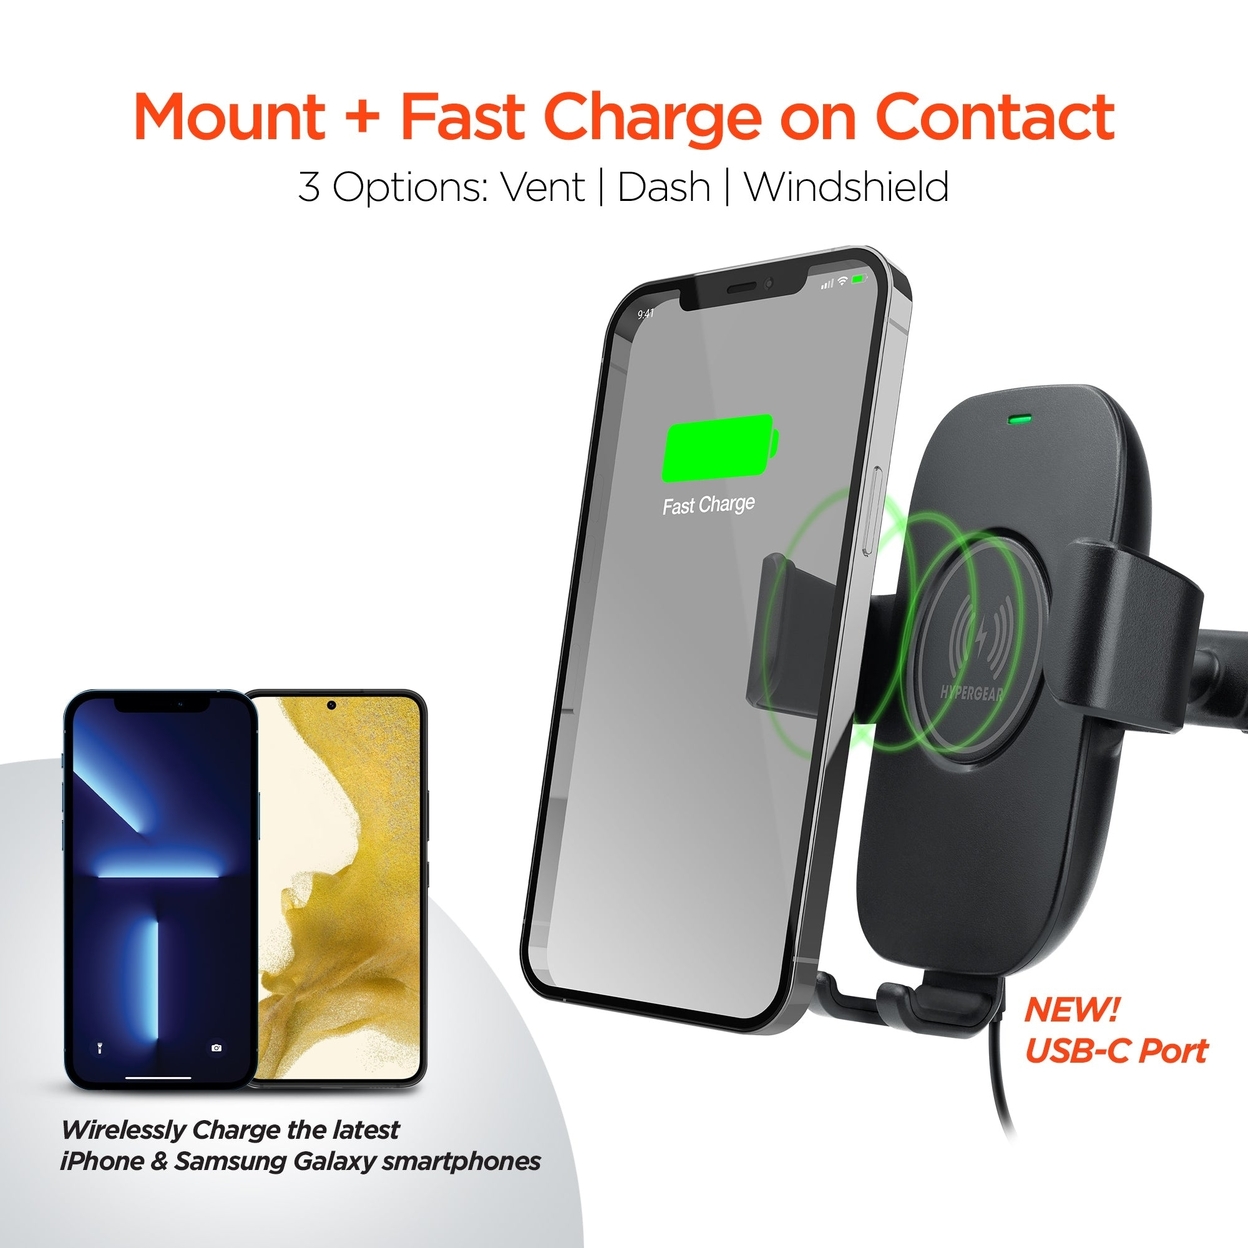 HyperGear Gravity 15W Wireless Fast Charge Mount - Hands-Free (15642-HYP)